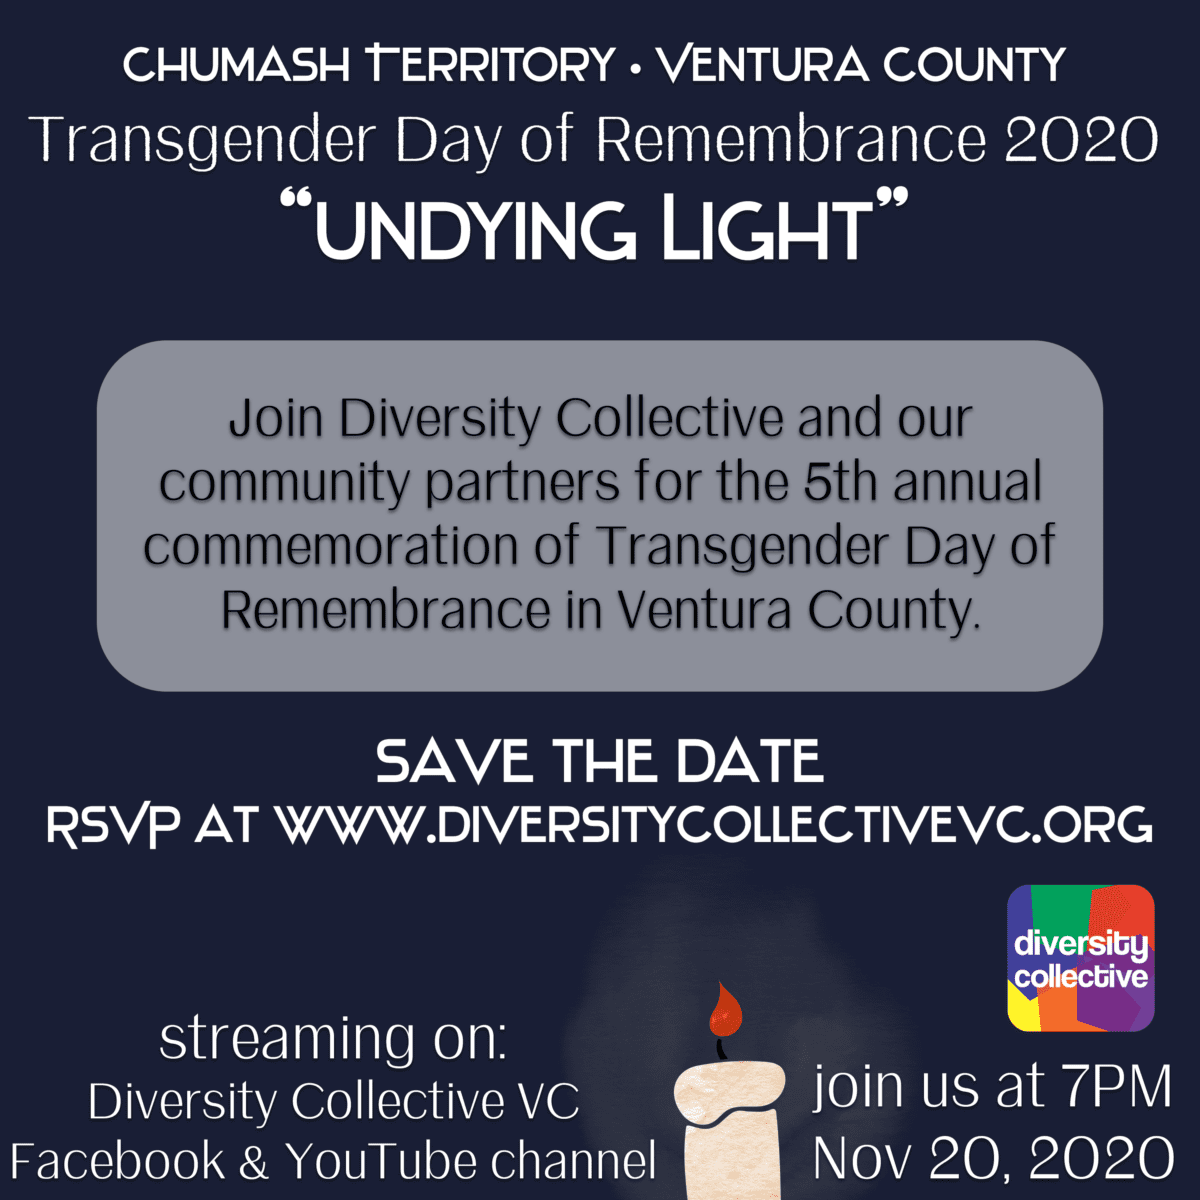 Promotional graphic for the 5th annual transgenura day event titled "undying light" by diversify collective, with a candle symbol, scheduled for november 20, 2020, including rsvp and streaming information.